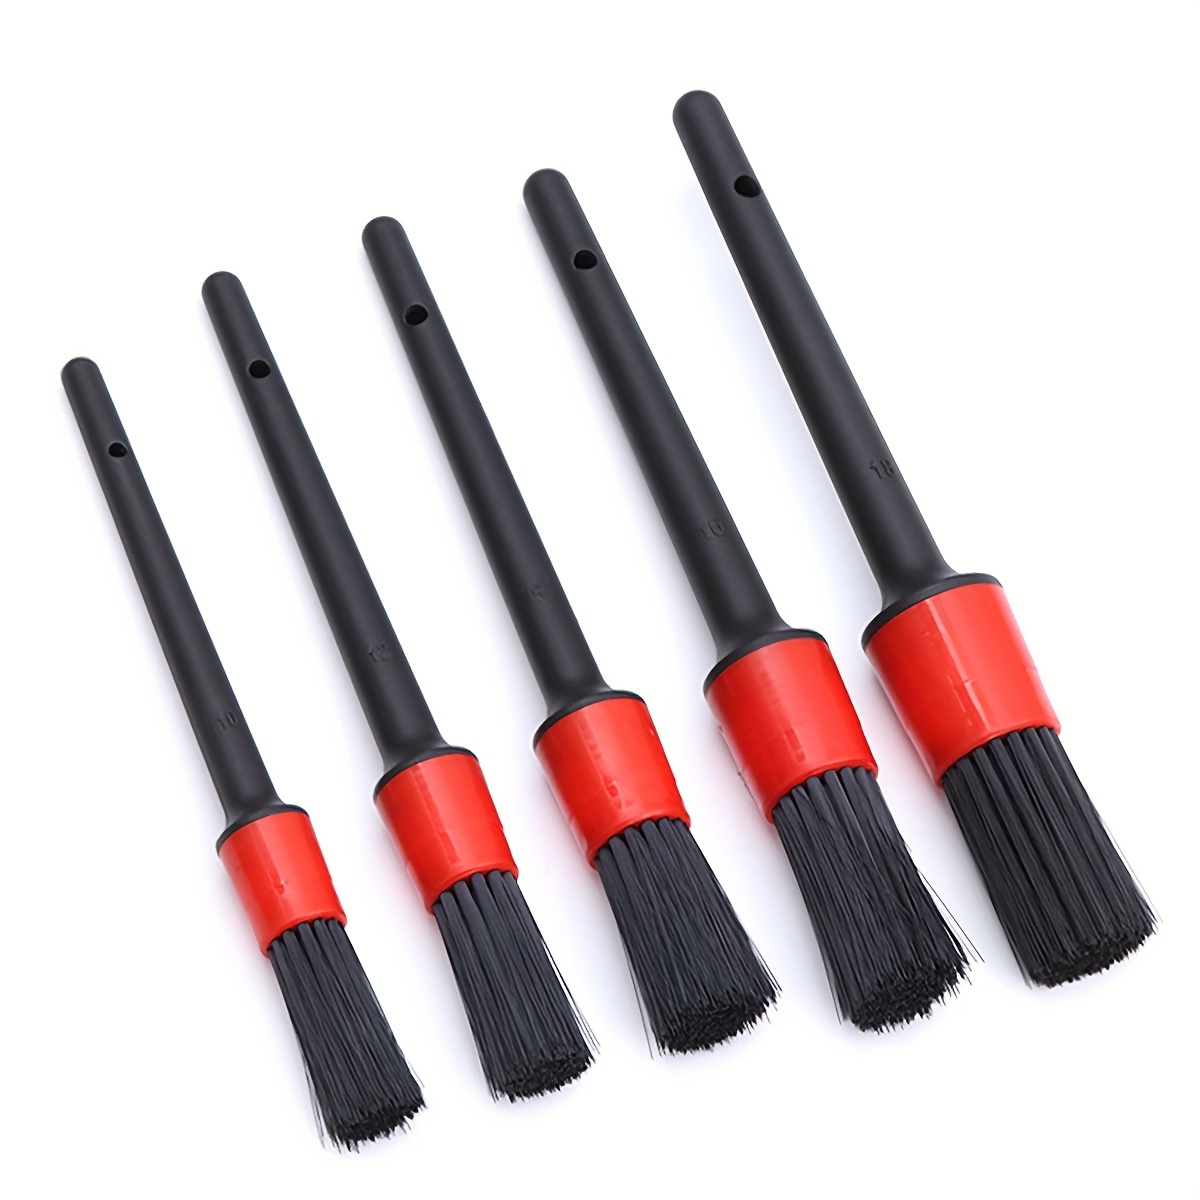 7pcs/Set, Cleaning Tools Set, 1pc Long Handle Dish Brush, 1pc Crevice  Cleaning Brush, 1pc Window Groove Cleaning Brush Handle With 4pcs  Replacement Sp